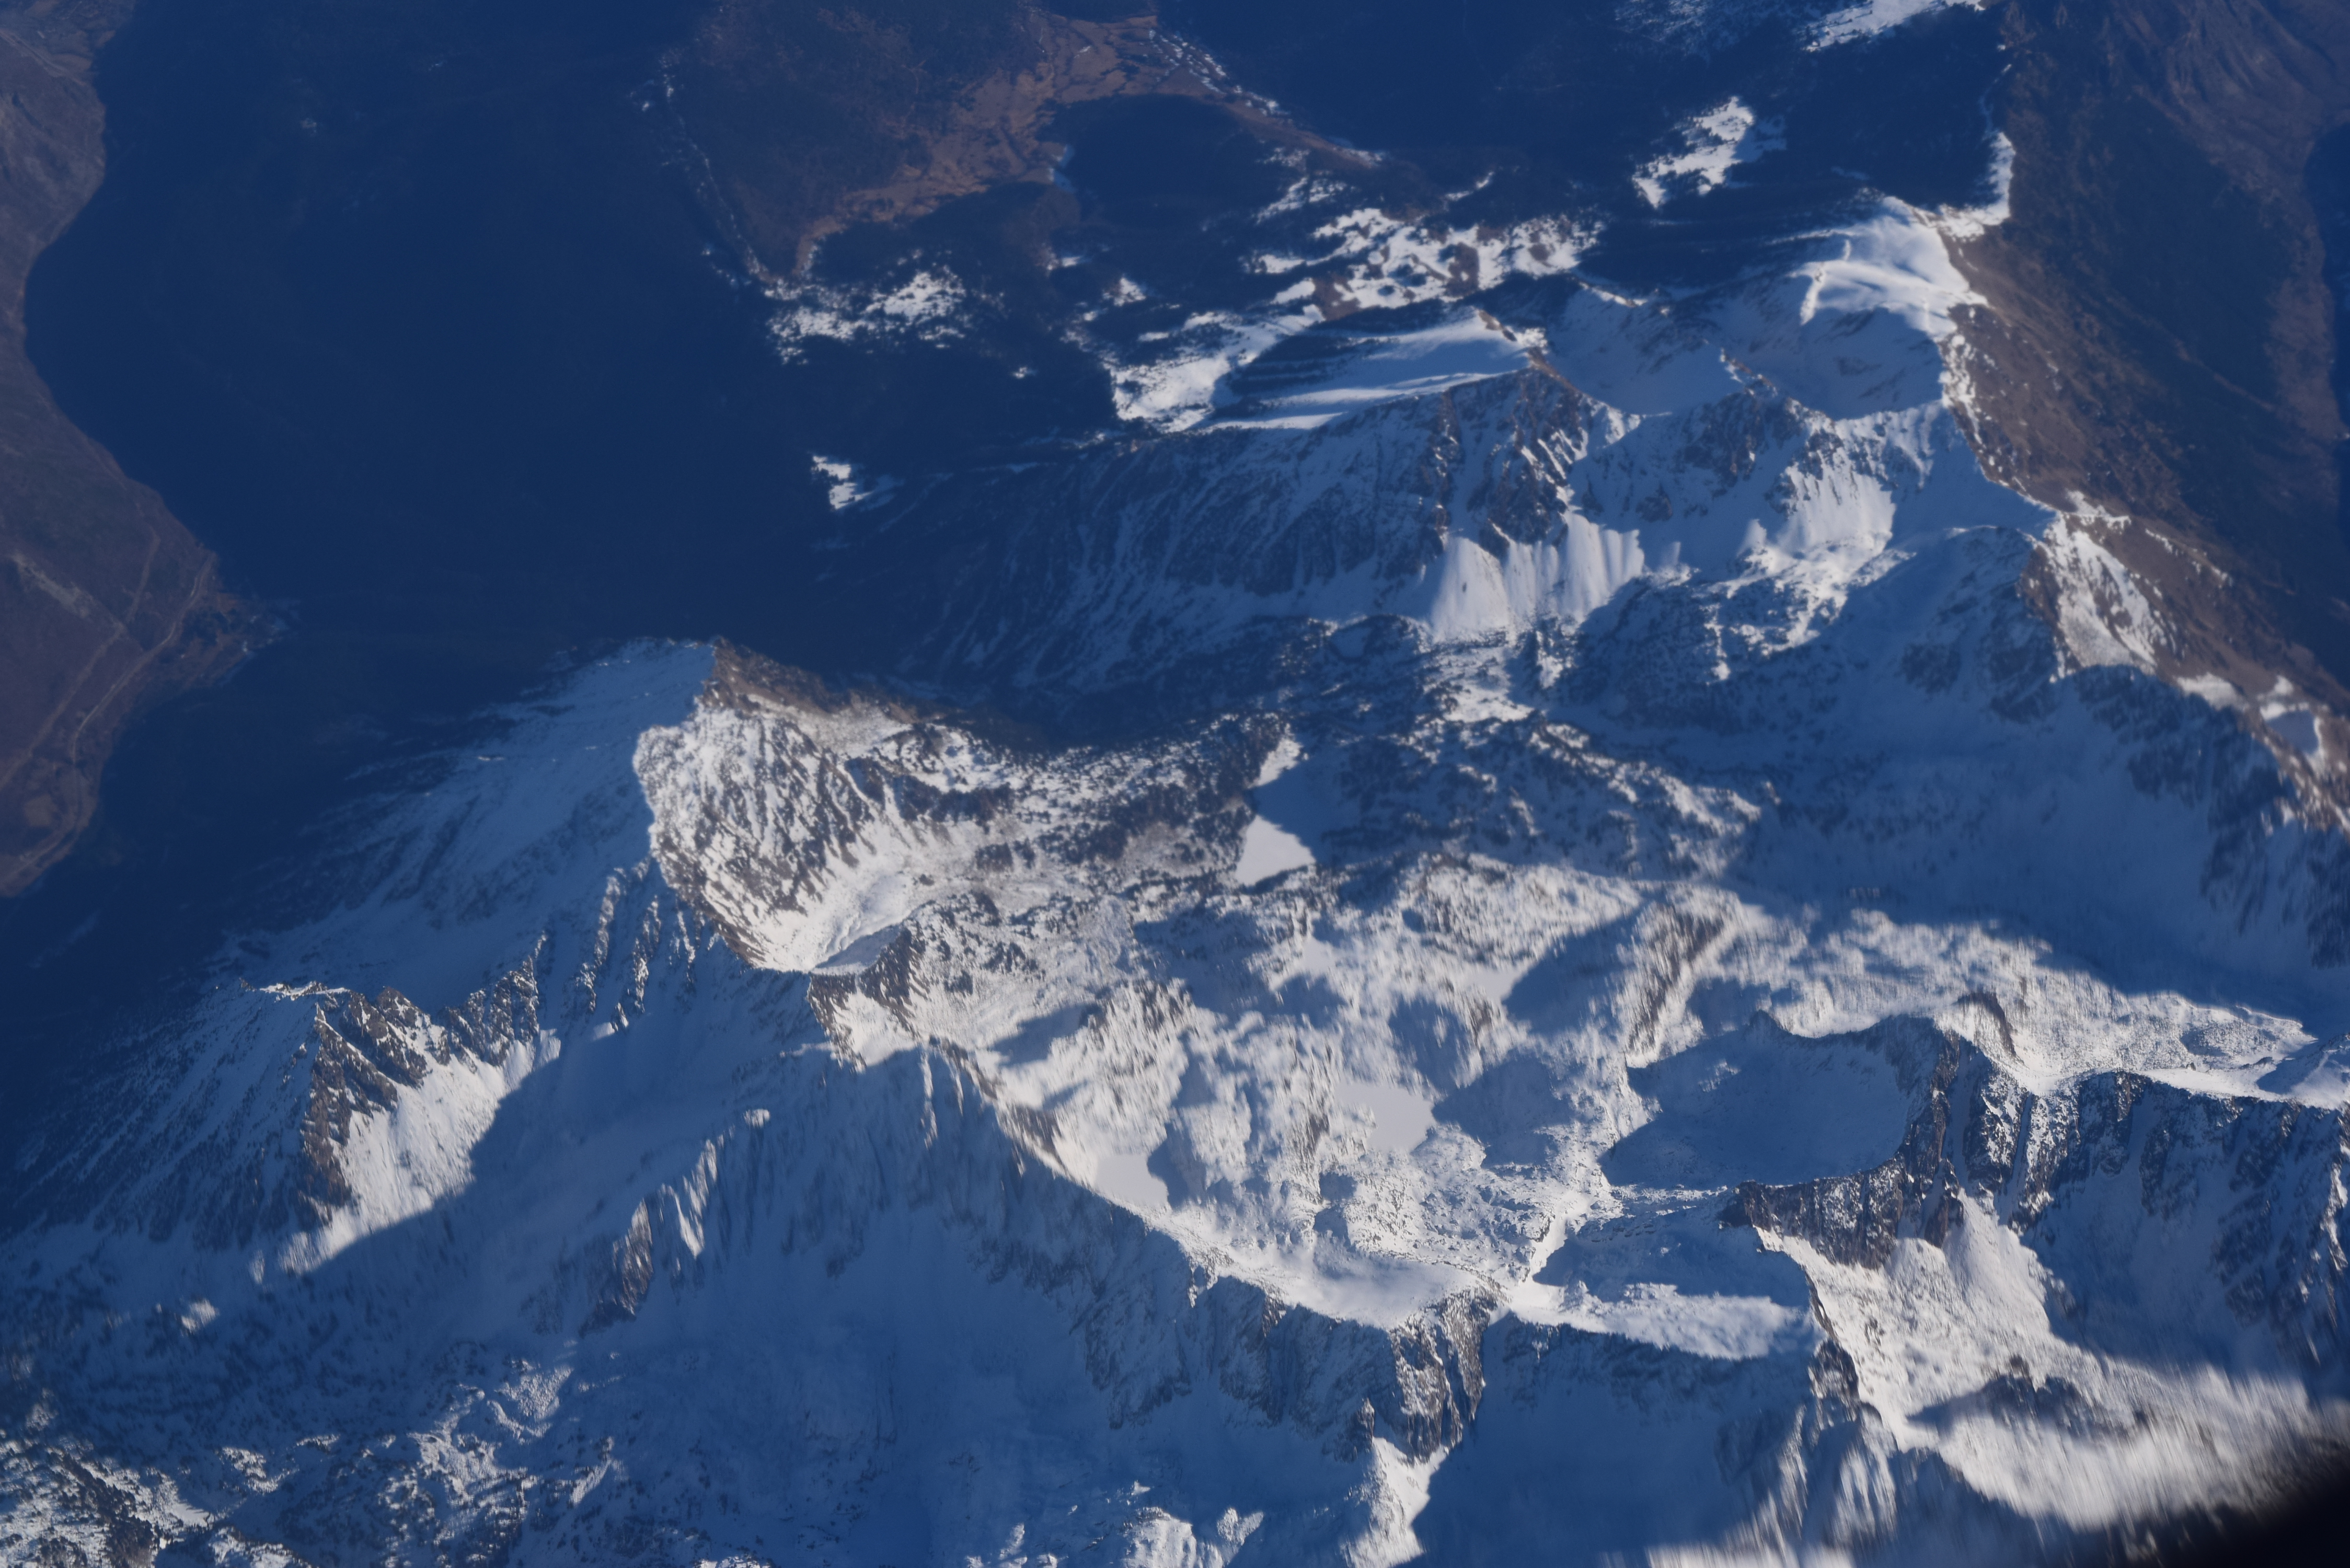 Pyrenees seen from the plane, Easyjet PMI - STN flight